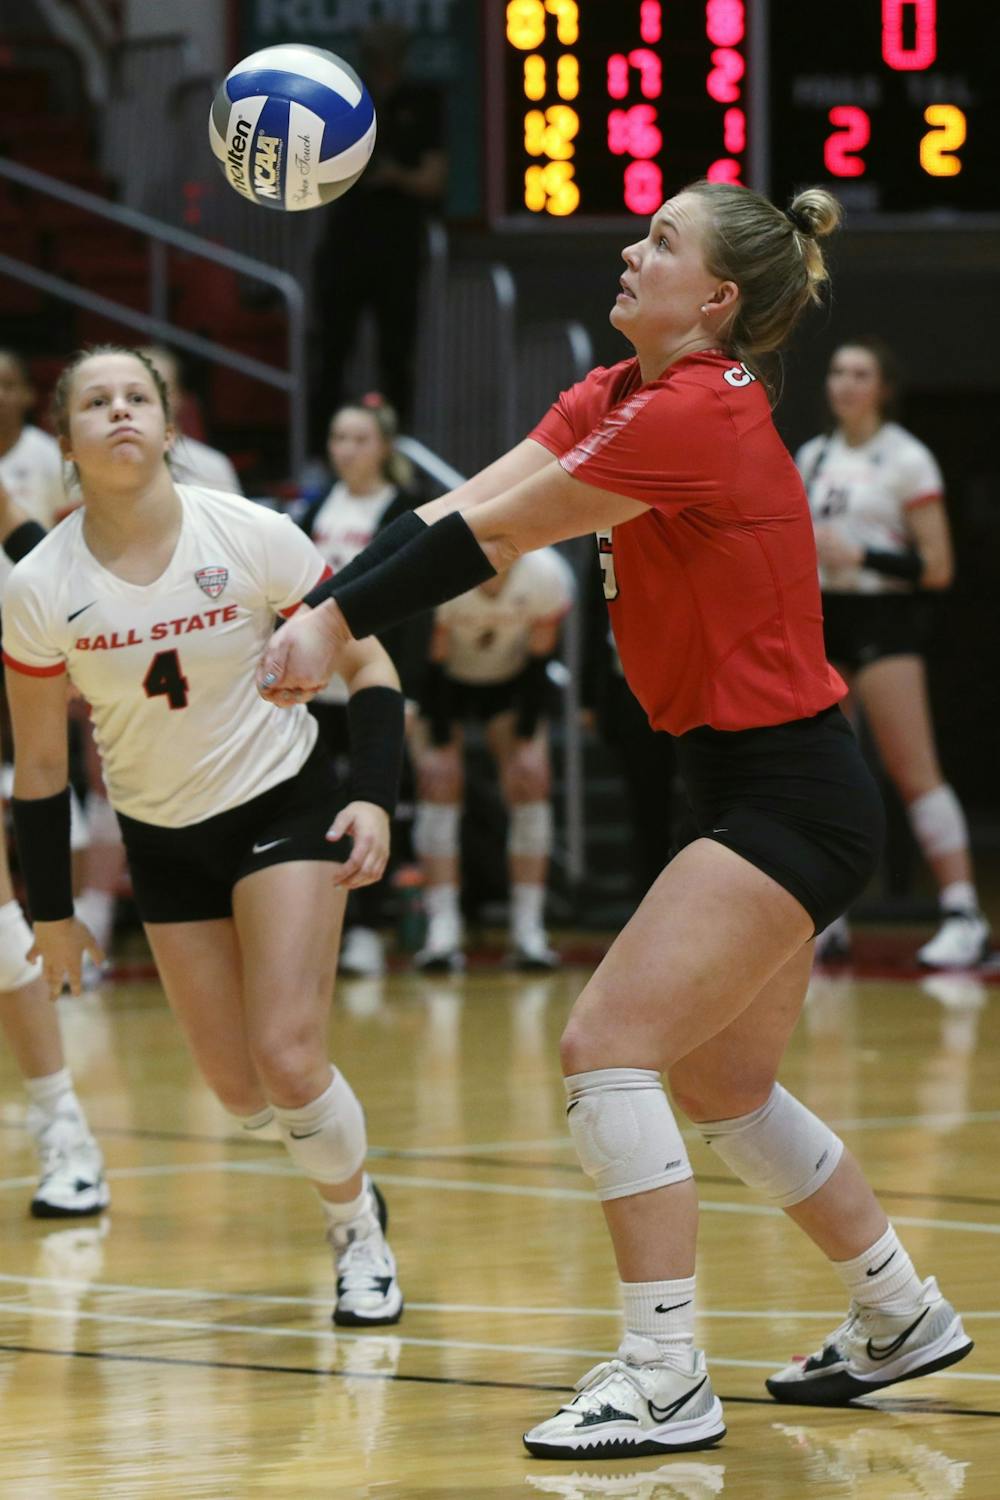 Ball State Women's Volleyball best Central Michigan, earn spot in MAC championship